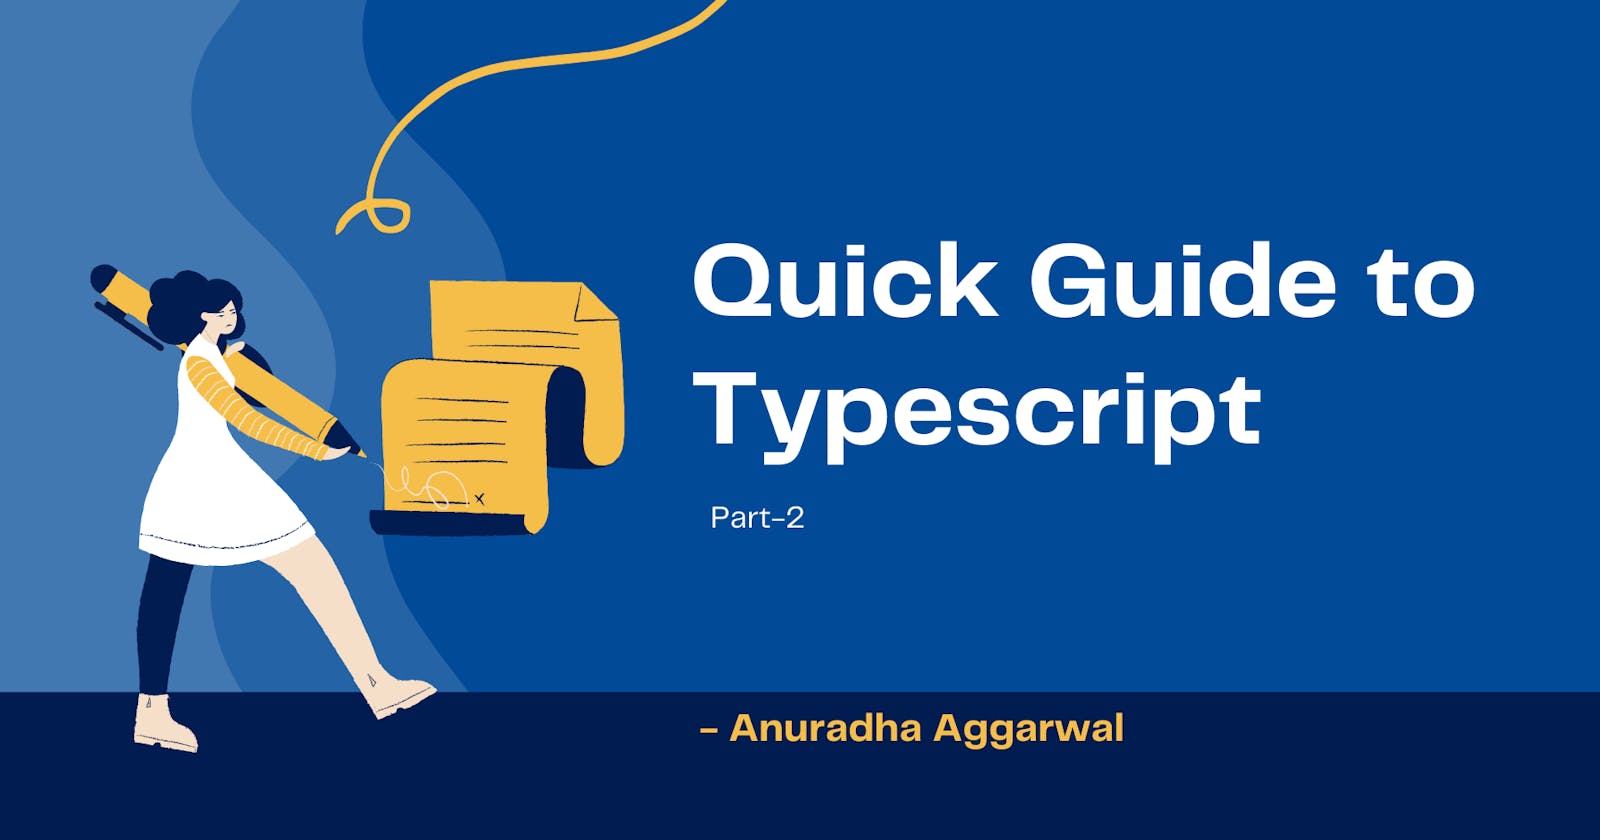 Quick Guide to Typescript - Part 2